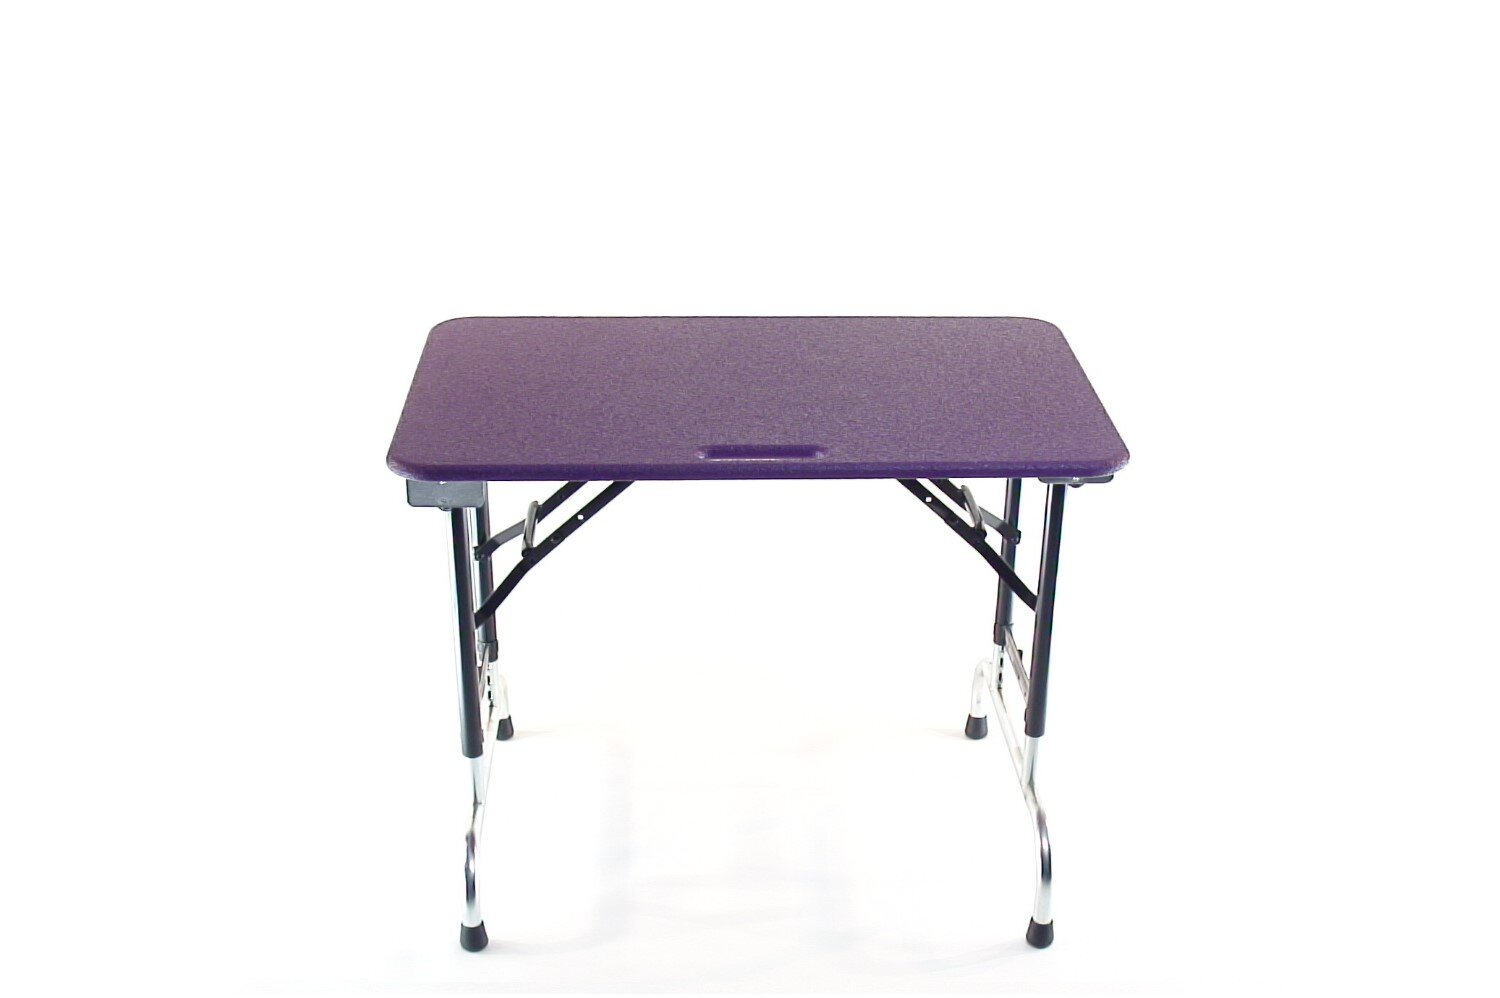 large grooming table